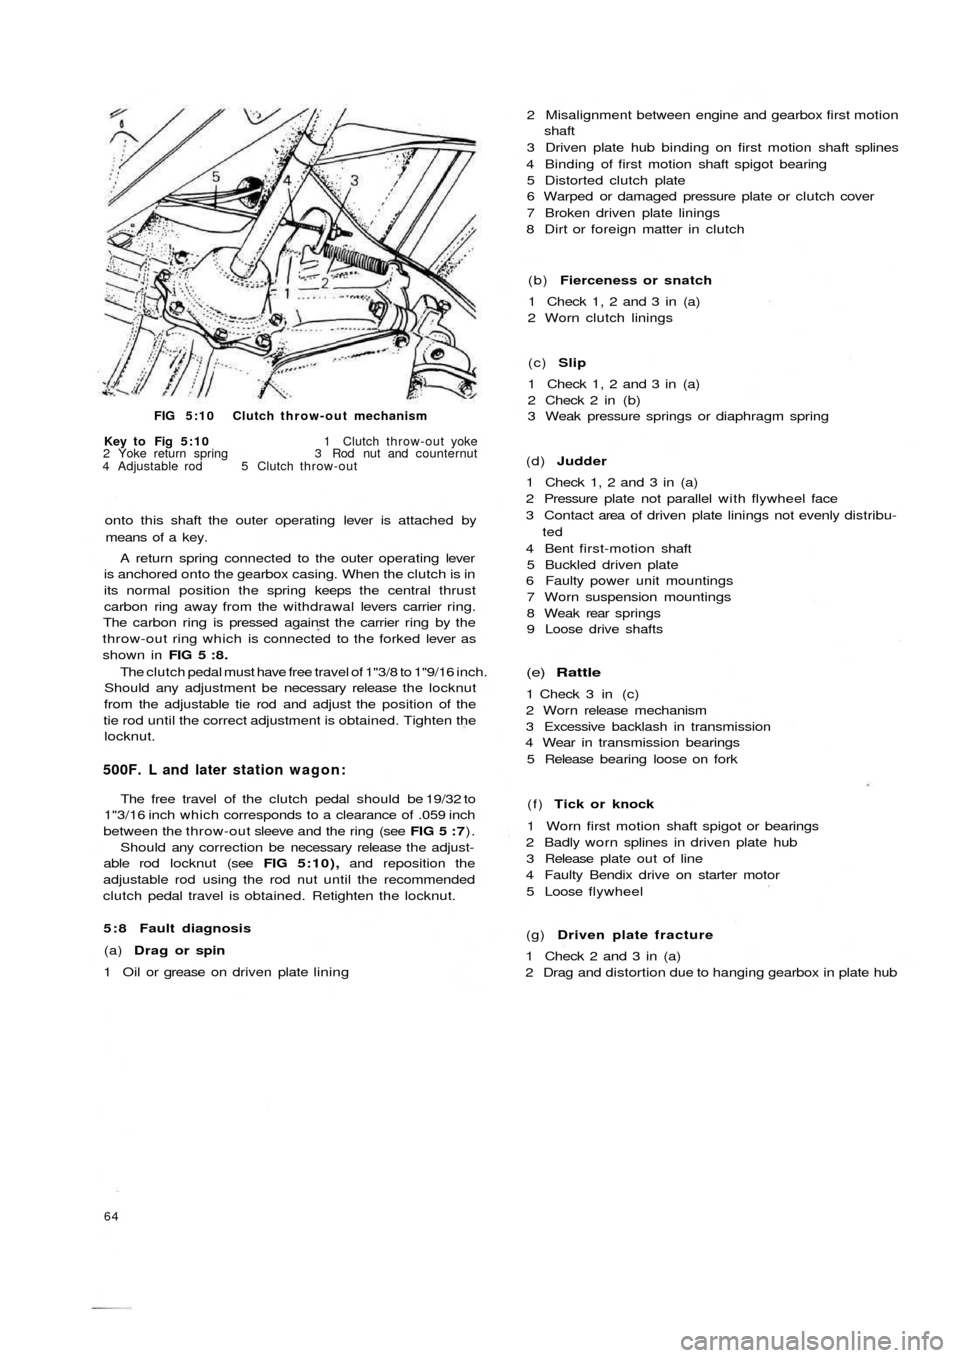 FIAT 500 1968 1.G Workshop Manual FIG 5:10 Clutch throw-out mechanism
Key to  Fig  5:10 1 Clutch throw-out yoke
2 Yoke return spring 3 Rod nut and counternut
4 Adjustable rod  5  Clutch throw-out
onto this shaft the outer operating le